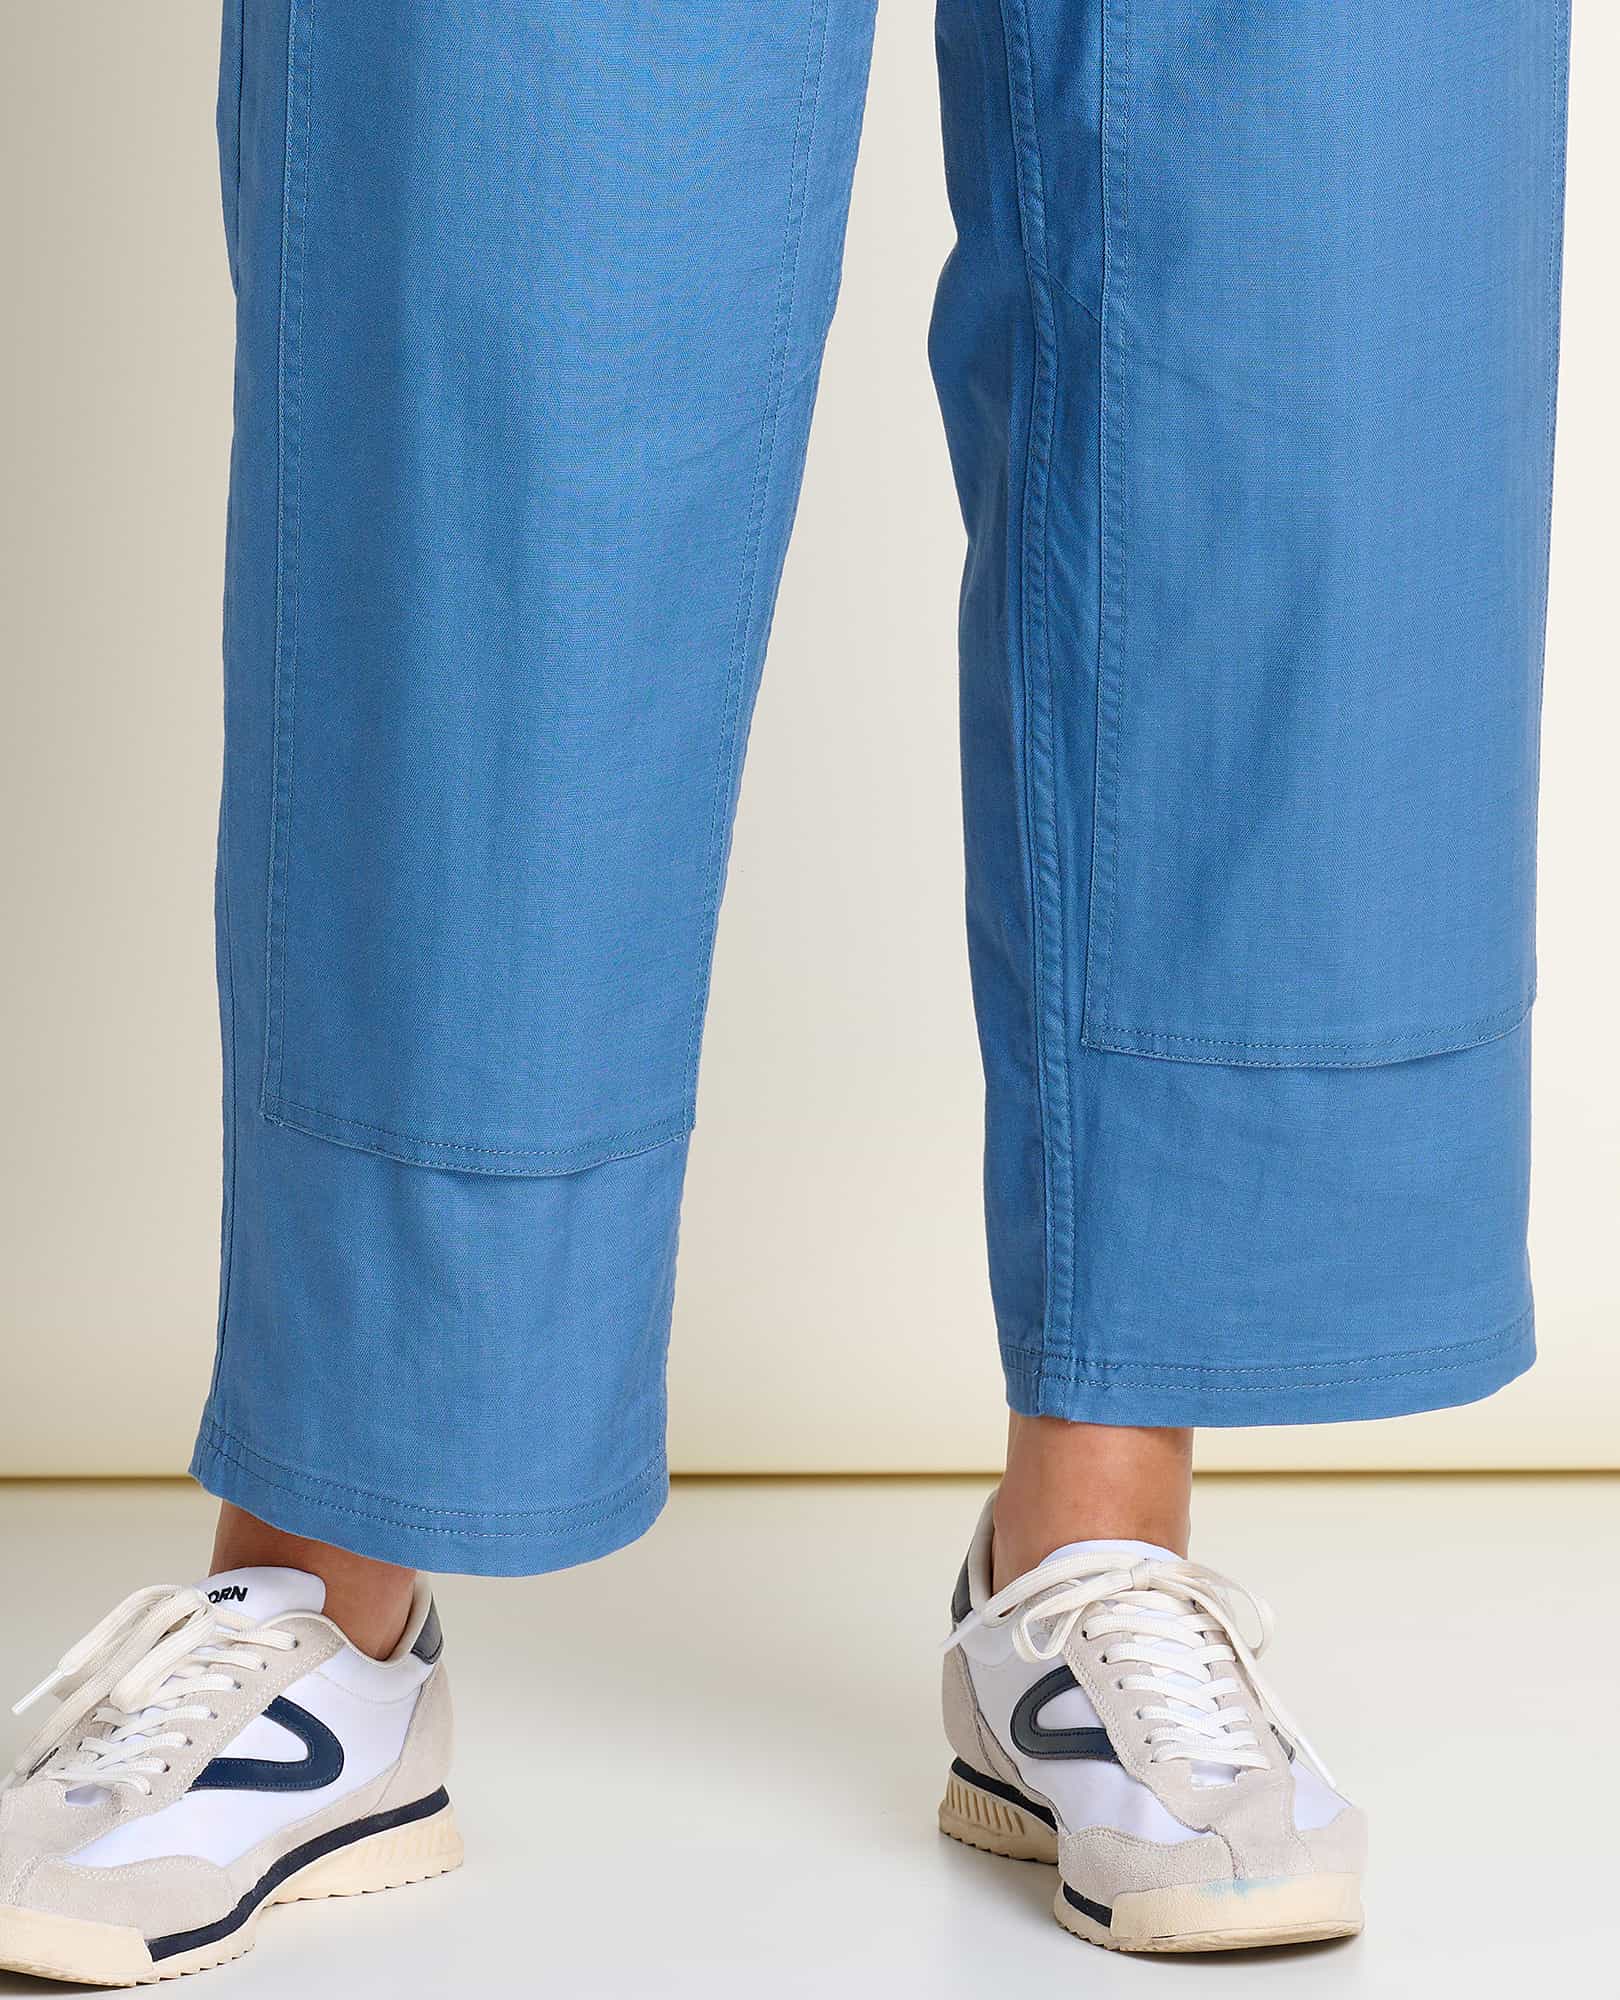 Juniper Utility Pant French Blue / 6 by Toad&Co